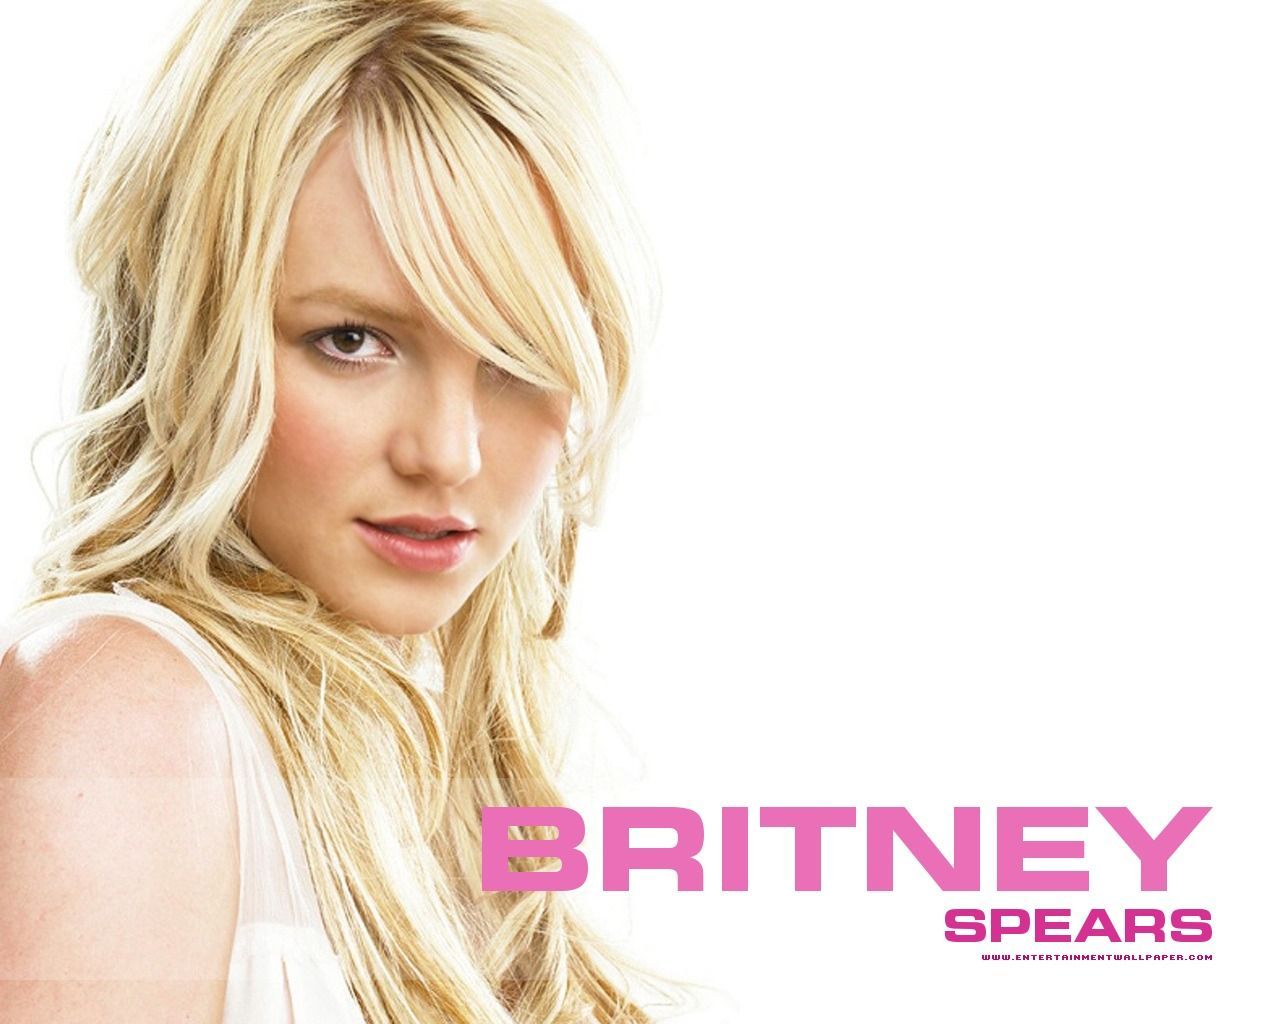 Cute Britney Spears Wallpapers Full HD Pictures